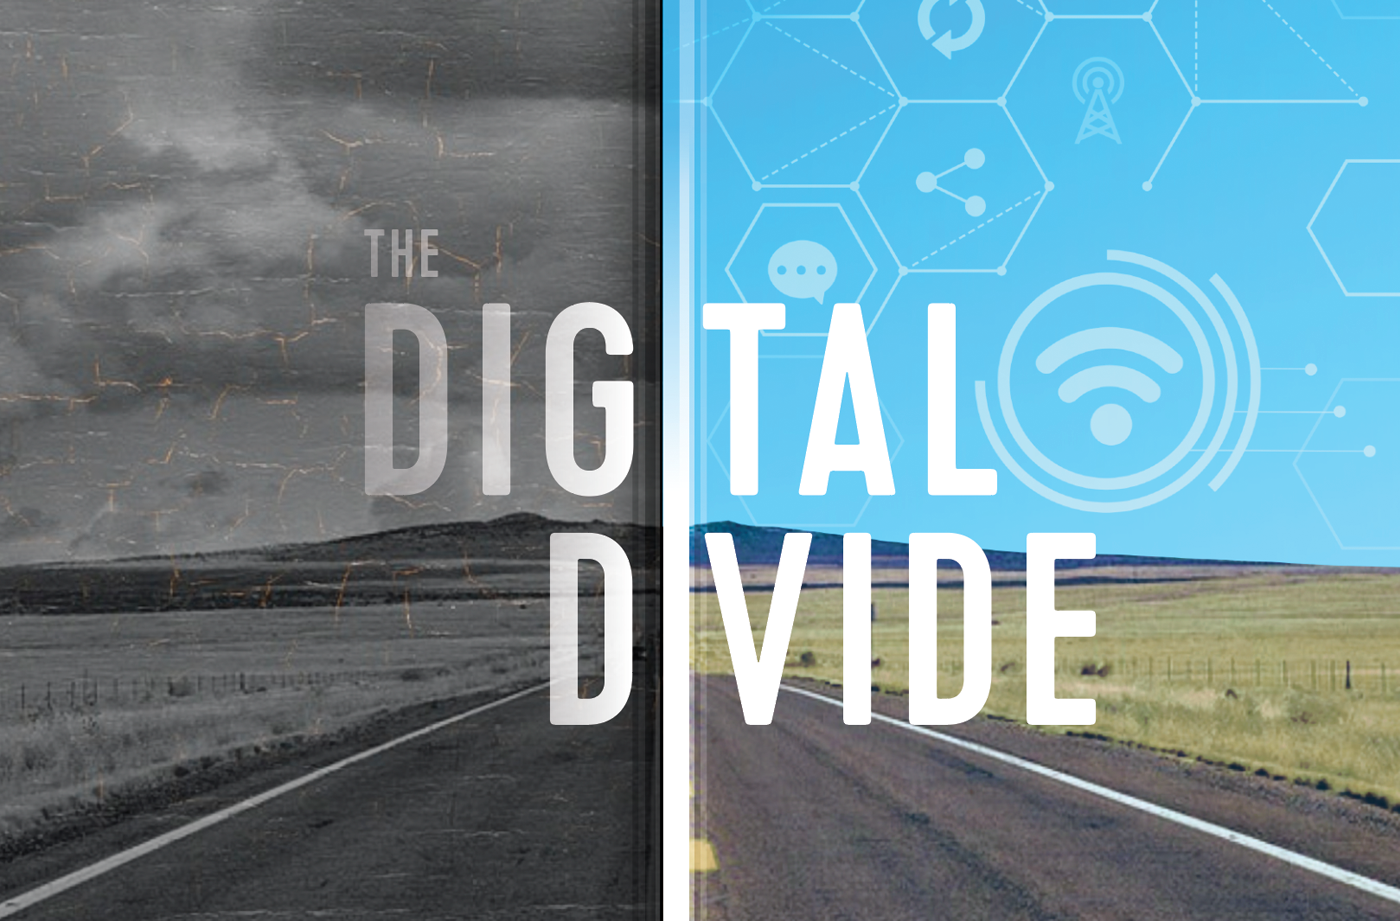 The words "the digital divide" are overlaid over a rural road, split in half, with one side looking like a cracking old black and white photo and the other side in color with internet symbols.